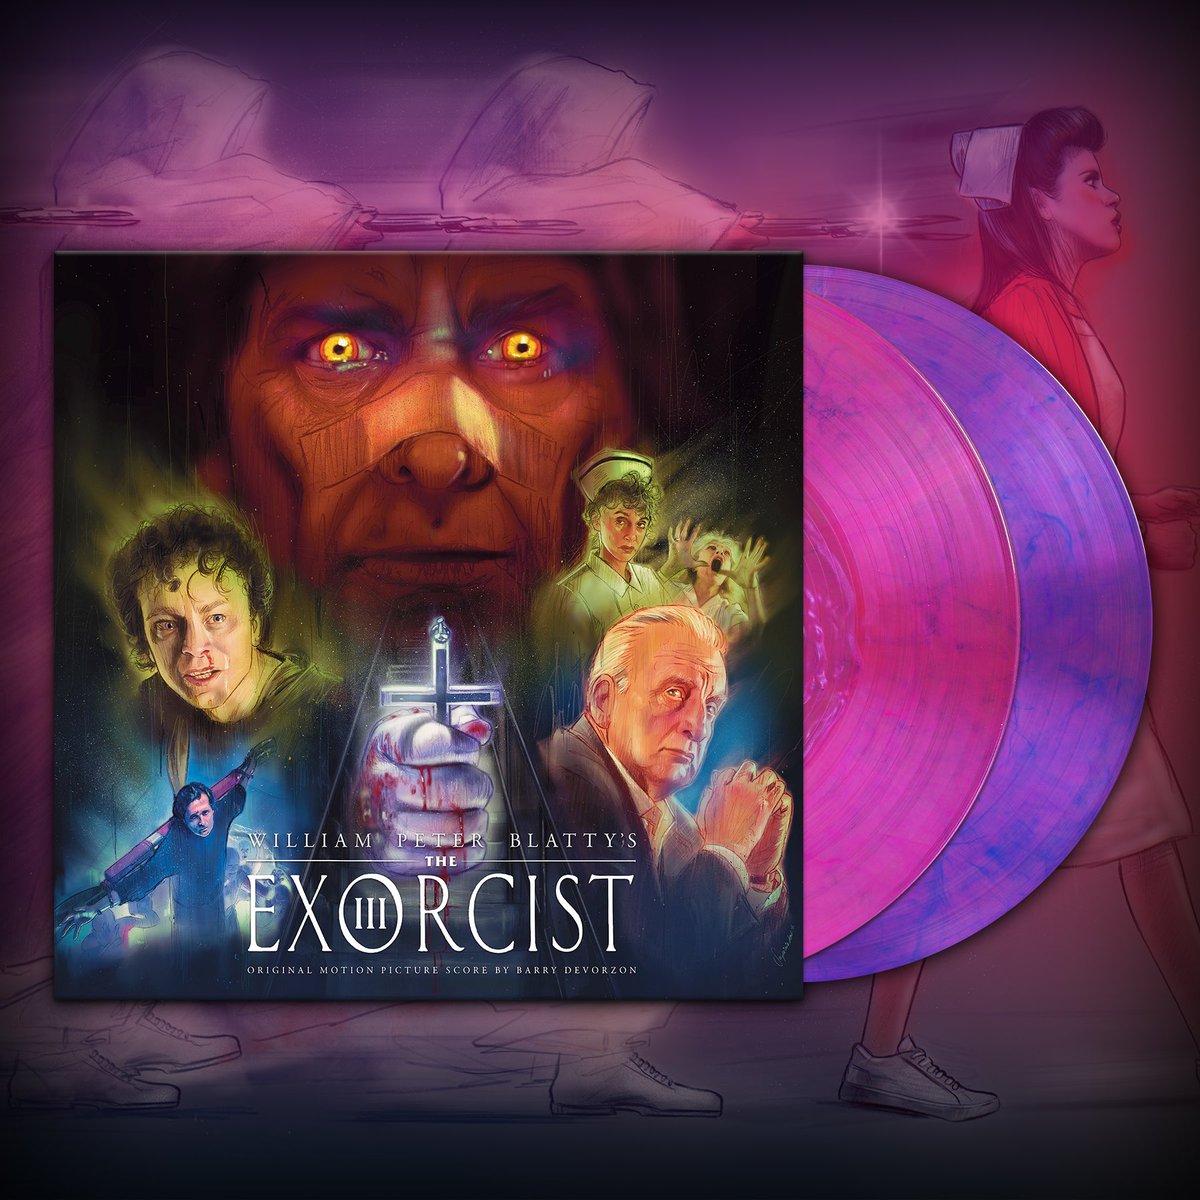 On Sale Tomorrow at 7AM CT! THE EXORCIST III Original Motion Picture Score 2xLP by Barry DeVorzon (The Warriors, Night Of The Creeps). Available for the first time in any format, Waxwork is beyond thrilled to release THE EXORCIST III as a deluxe double vinyl album featuring the